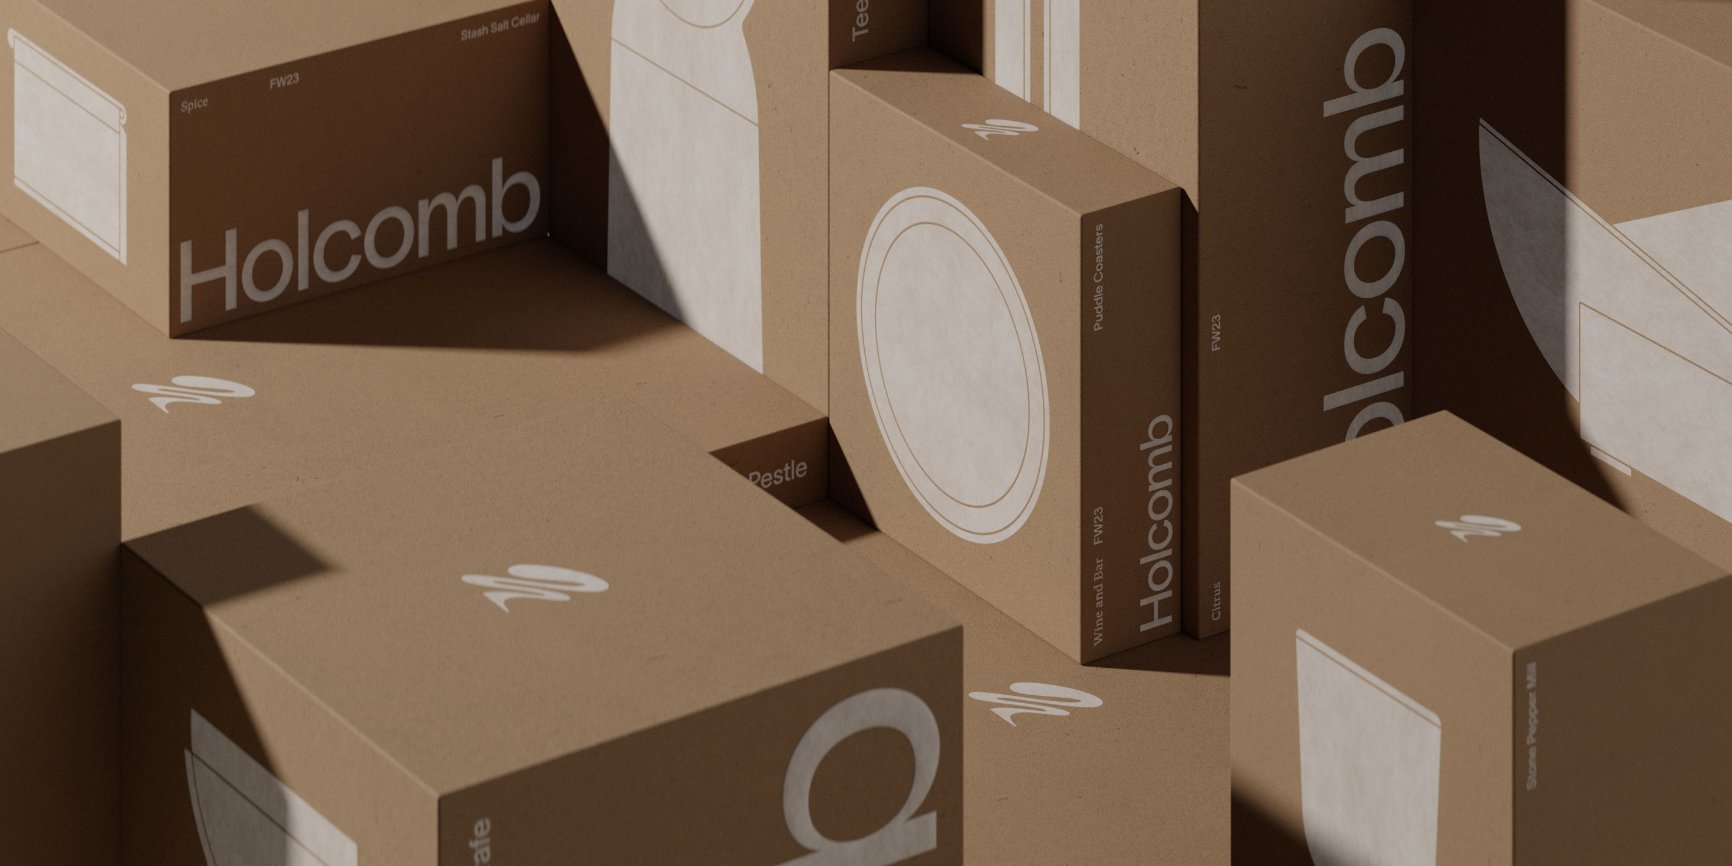 Holcomb’s Packaging is a Tasteful Amuse Bouche for the Sustainable Home Goods Inside